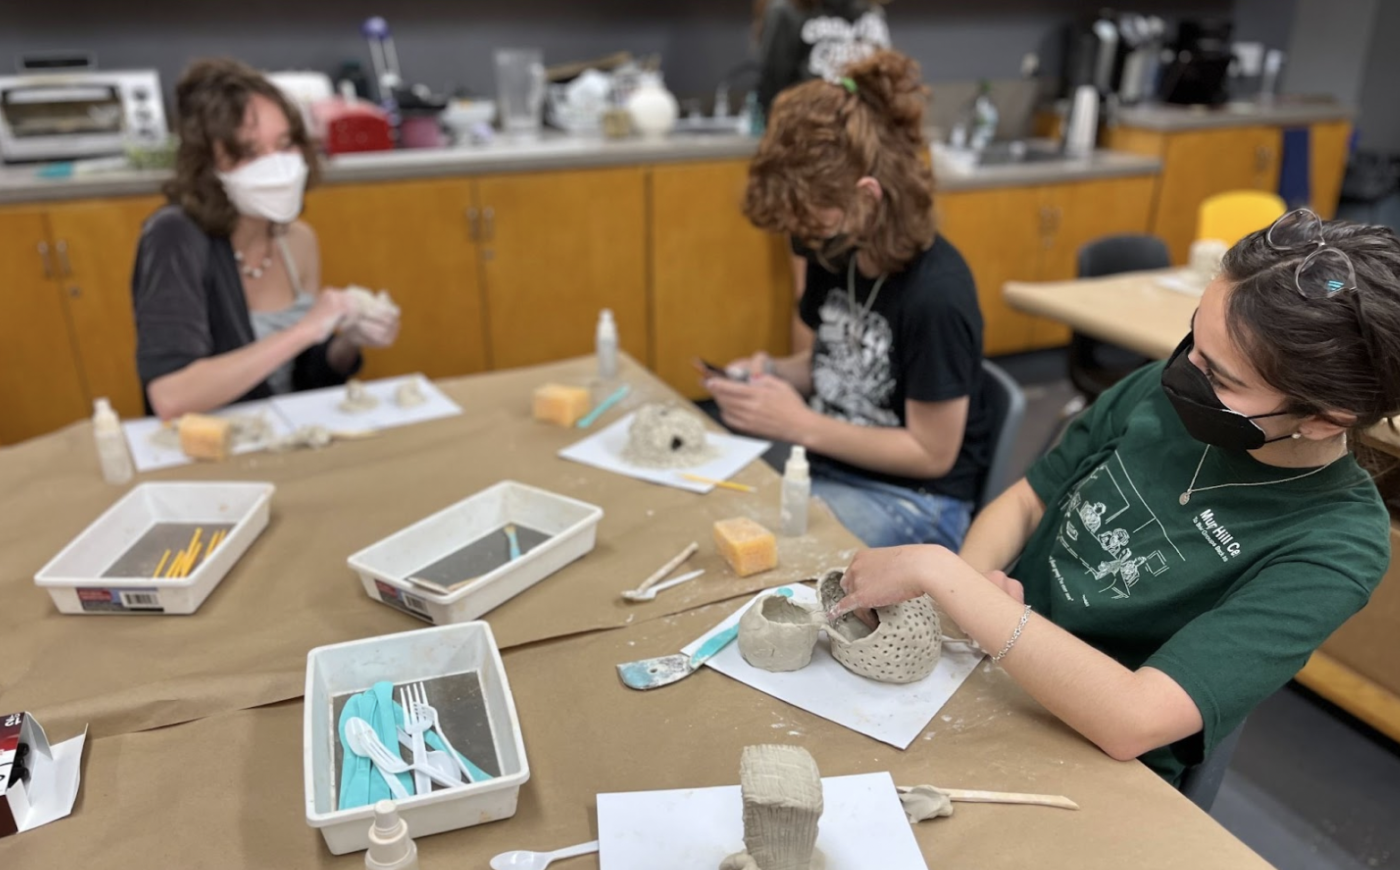 Students creating air-dry clay artworks in the studio.